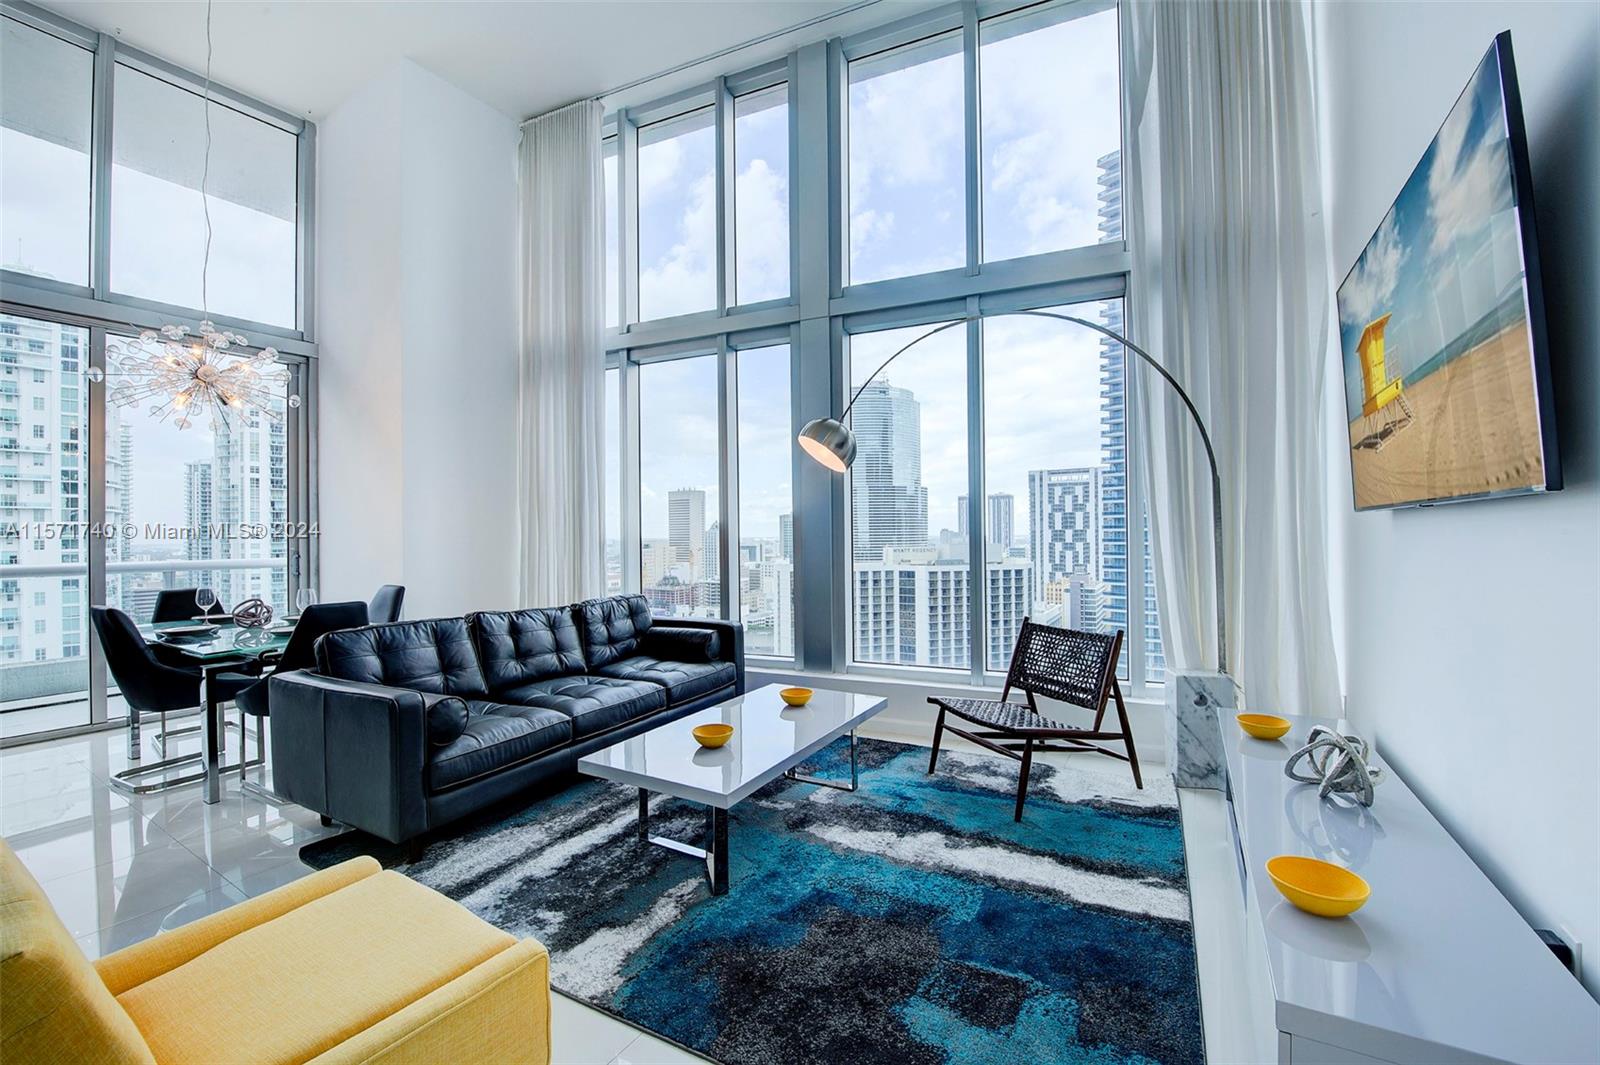 Rare 2/2 NE Corner Unit at Icon Brickell with 16ft. Double-height ceilings, Bay, and Ocean Views. Short-Term Rentals Permitted. Enjoy stunning views of Biscayne Bay, Miami River & Downtown skyline from floor-to-ceiling windows. Move-in ready. Ideal Miami vacation rental investment generating well over $100k Airbnb income. Top-notch management. Italian kitchen, Subzero Wolf Bosch appliances. Designed by Philippe Starck. World-class amenities: Heated infinity pool, movie theater, lush landscaping. Fine dining with Cipriani & LaVeinte in the building.